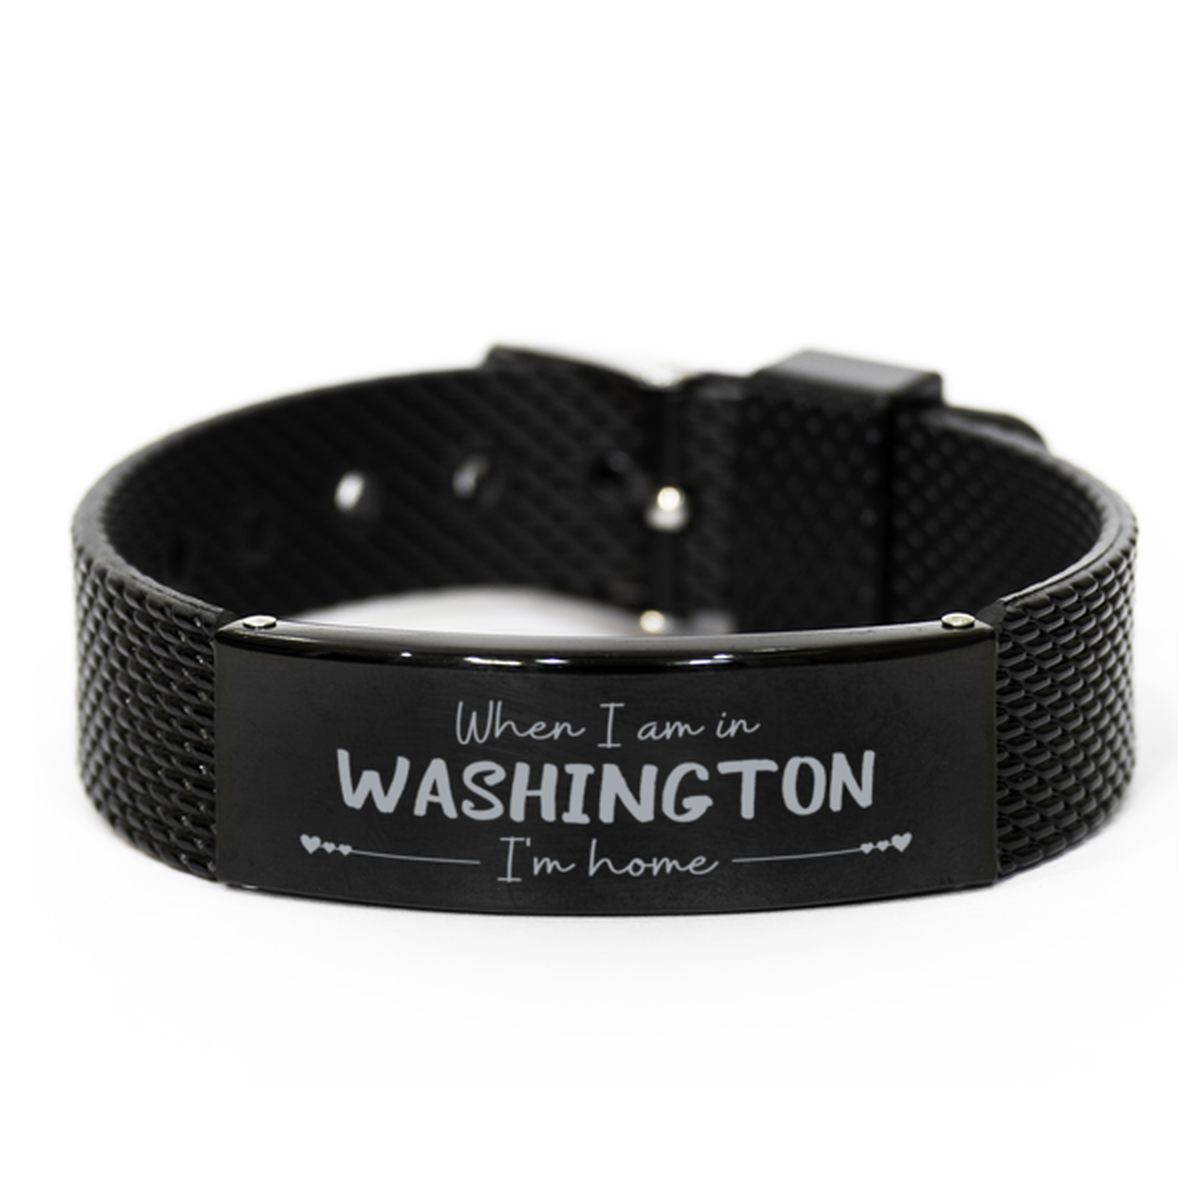 When I am in Washington I'm home Black Shark Mesh Bracelet, Cheap Gifts For Washington, State Washington Birthday Gifts for Friends Coworker